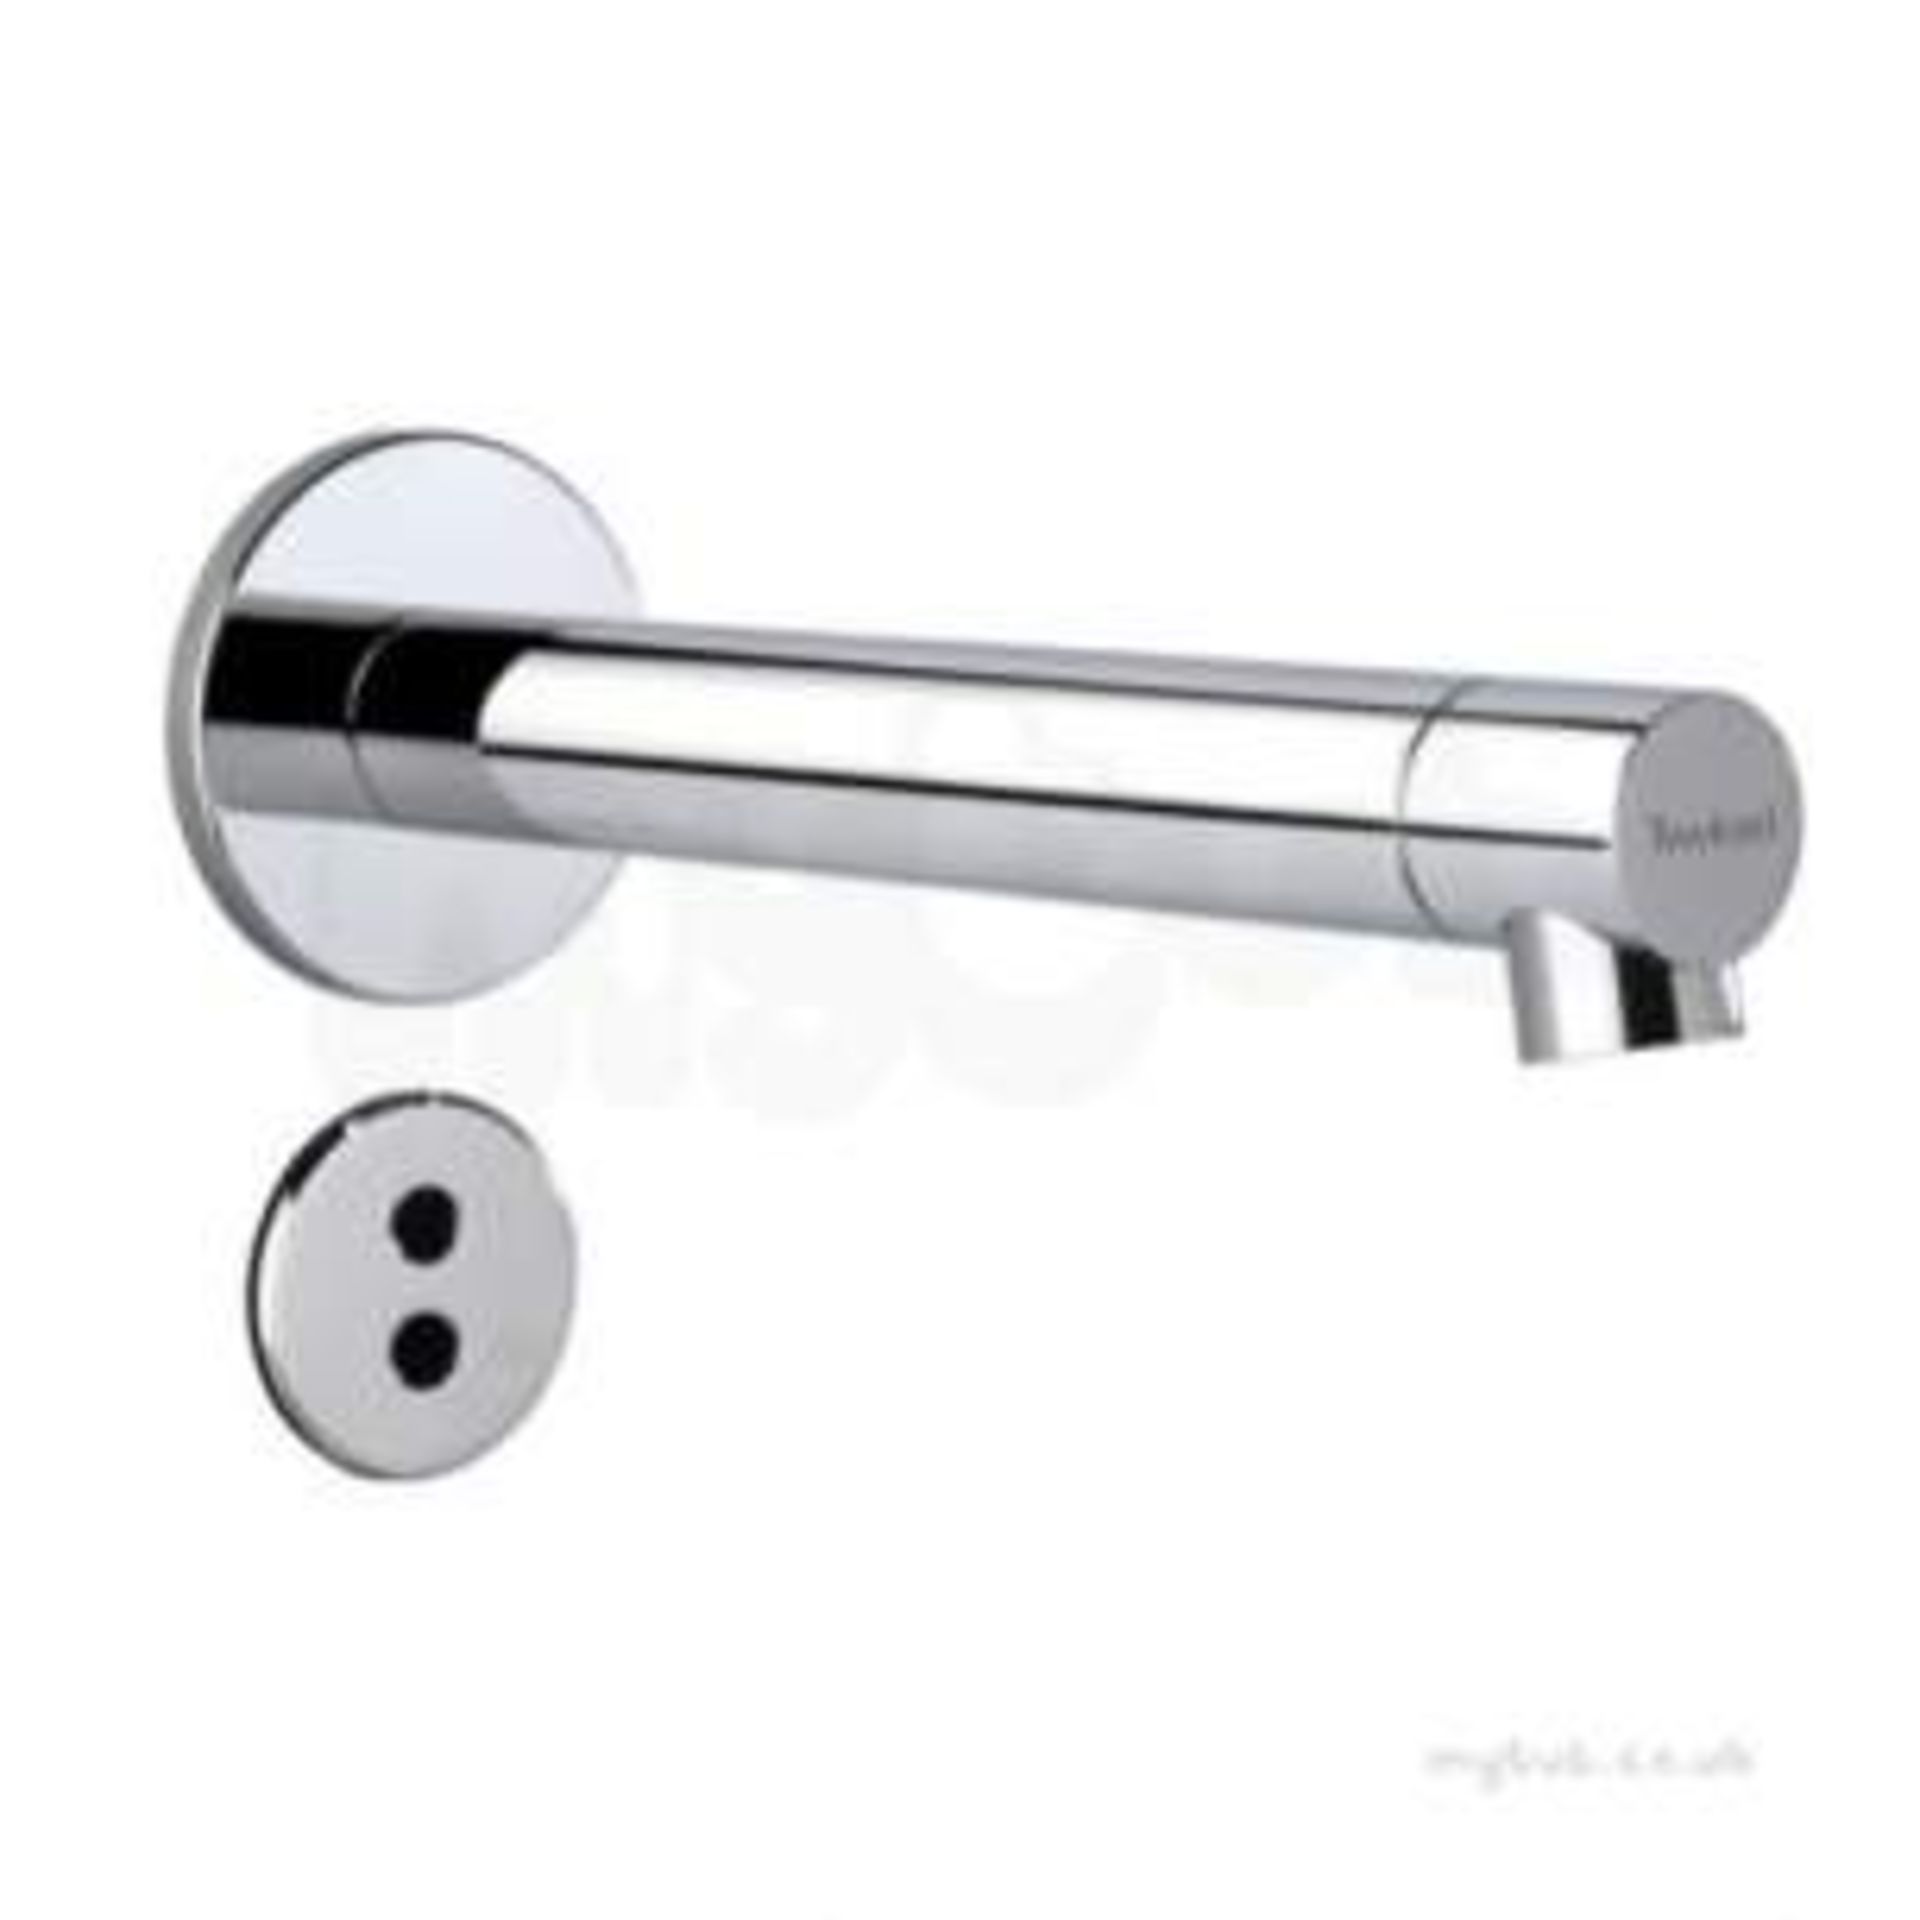 (JG116) NEW & BOXED Twyford IR Wall Mounted Spout Tap 234mm Wall Mounted Infra Red Spout 234mm,...